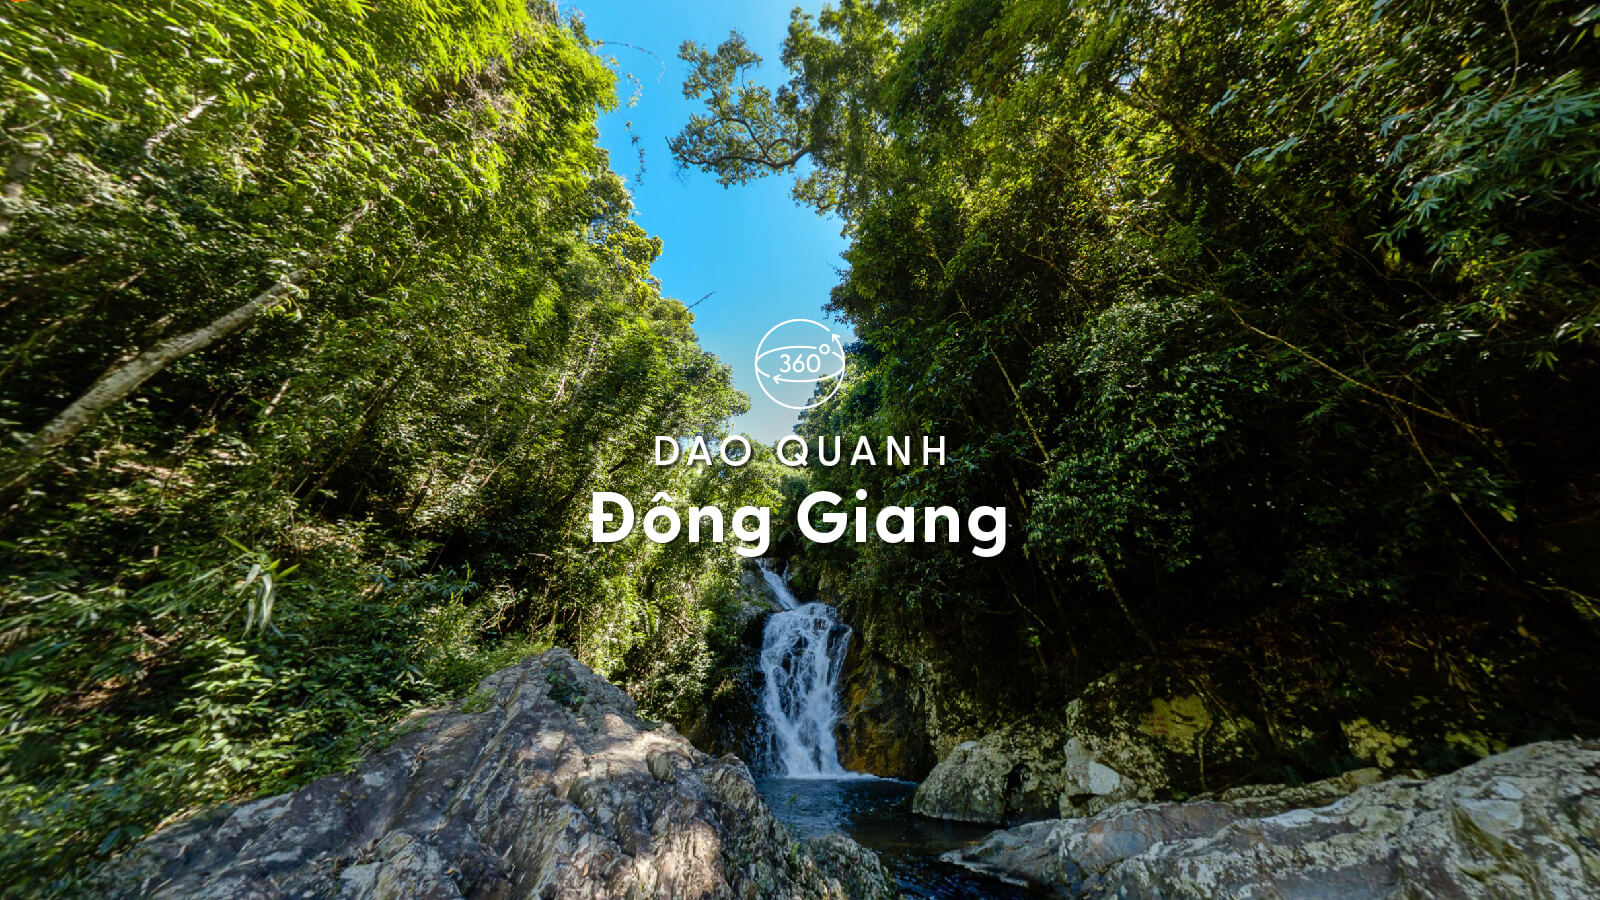 dong giang district in 360 - visitquangnam